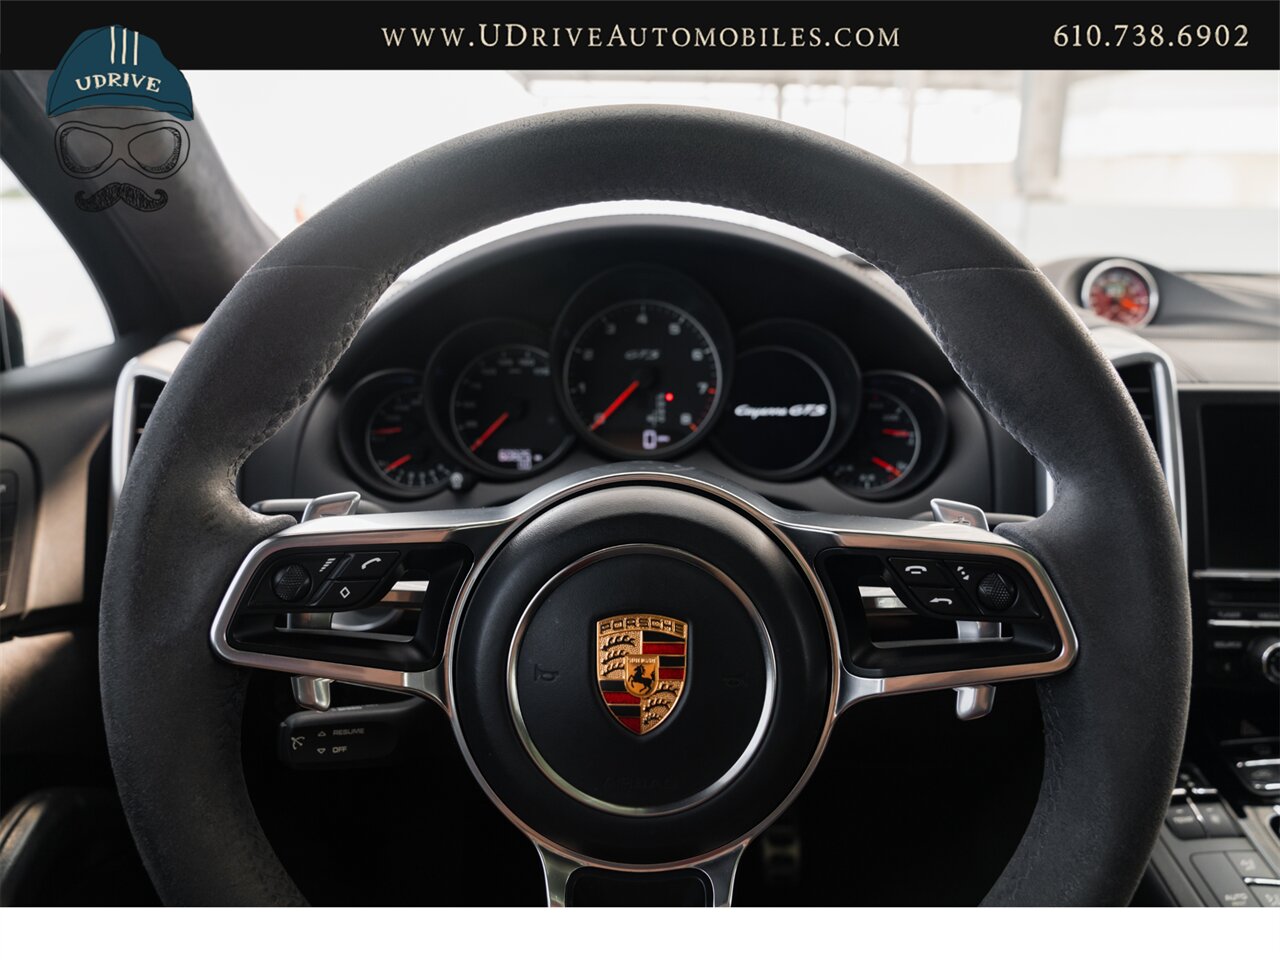 2016 Porsche Cayenne GTS  CPO Warranty 21in Whls Sport Chrono Red Dial Alcantara Red Belts Pano - Photo 33 - West Chester, PA 19382